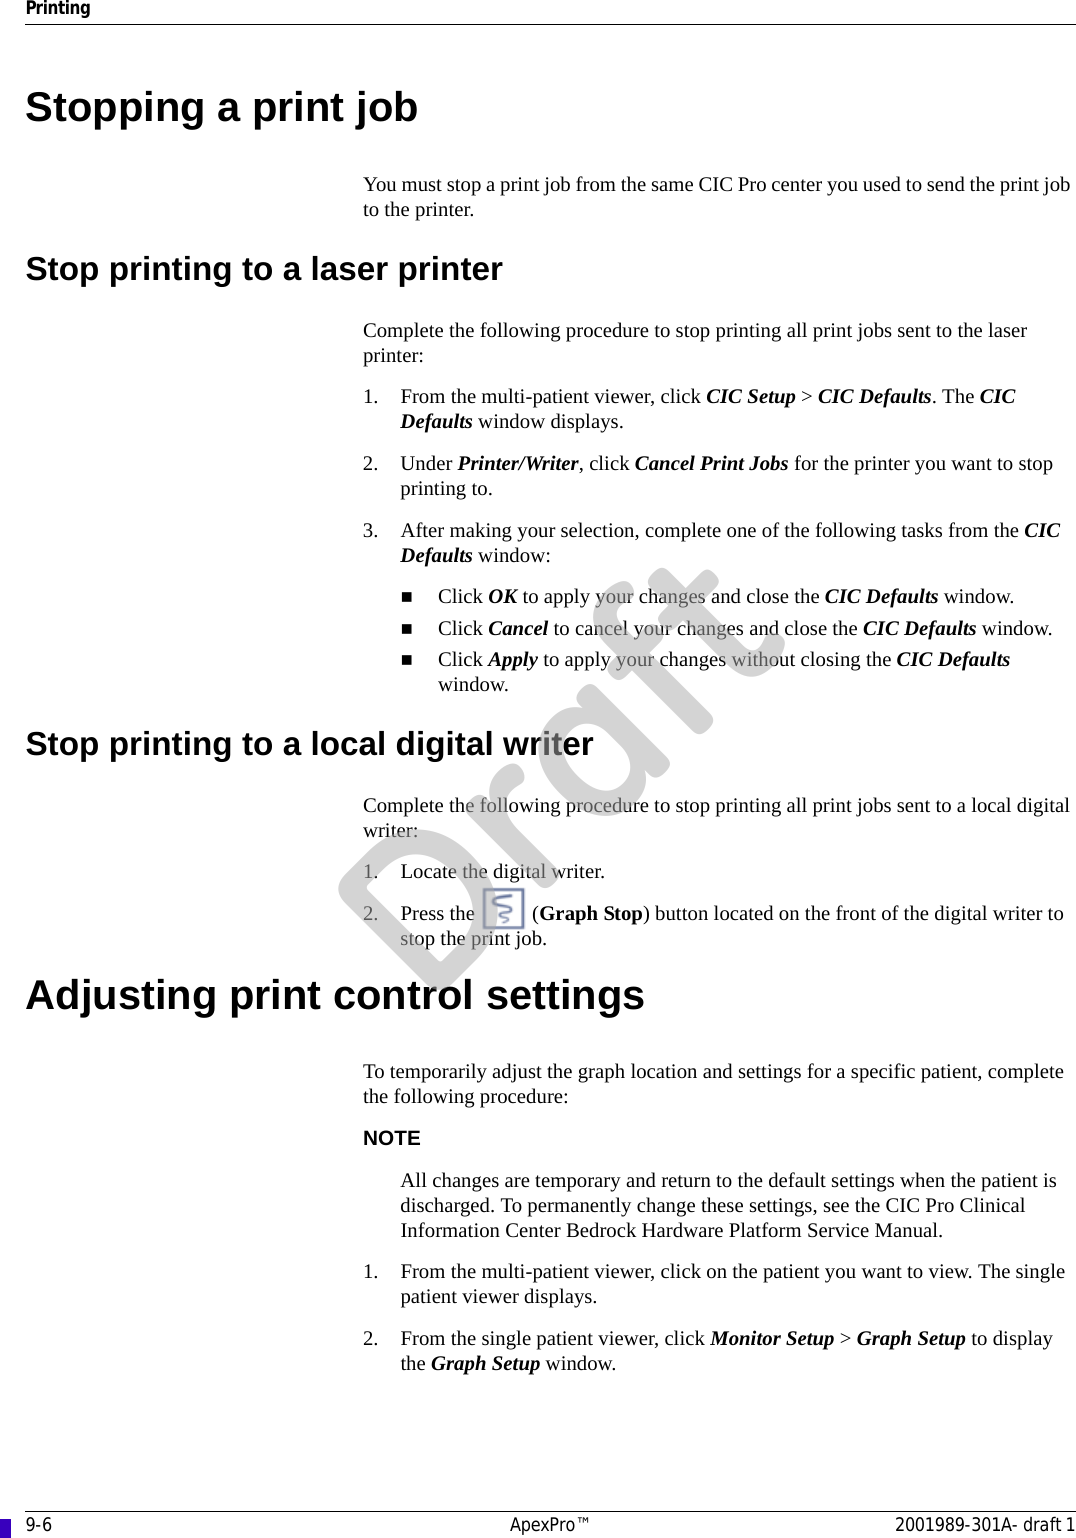 9-6 ApexPro™ 2001989-301A- draft 1PrintingStopping a print jobYou must stop a print job from the same CIC Pro center you used to send the print job to the printer.Stop printing to a laser printerComplete the following procedure to stop printing all print jobs sent to the laser printer:1. From the multi-patient viewer, click CIC Setup &gt; CIC Defaults. The CIC Defaults window displays.2. Under Printer/Writer, click Cancel Print Jobs for the printer you want to stop printing to.3. After making your selection, complete one of the following tasks from the CIC Defaults window:Click OK to apply your changes and close the CIC Defaults window.Click Cancel to cancel your changes and close the CIC Defaults window.Click Apply to apply your changes without closing the CIC Defaults window.Stop printing to a local digital writerComplete the following procedure to stop printing all print jobs sent to a local digital writer:1. Locate the digital writer.2. Press the   (Graph Stop) button located on the front of the digital writer to stop the print job.Adjusting print control settingsTo temporarily adjust the graph location and settings for a specific patient, complete the following procedure:NOTEAll changes are temporary and return to the default settings when the patient is discharged. To permanently change these settings, see the CIC Pro Clinical Information Center Bedrock Hardware Platform Service Manual.1. From the multi-patient viewer, click on the patient you want to view. The single patient viewer displays.2. From the single patient viewer, click Monitor Setup &gt; Graph Setup to display the Graph Setup window.Draft